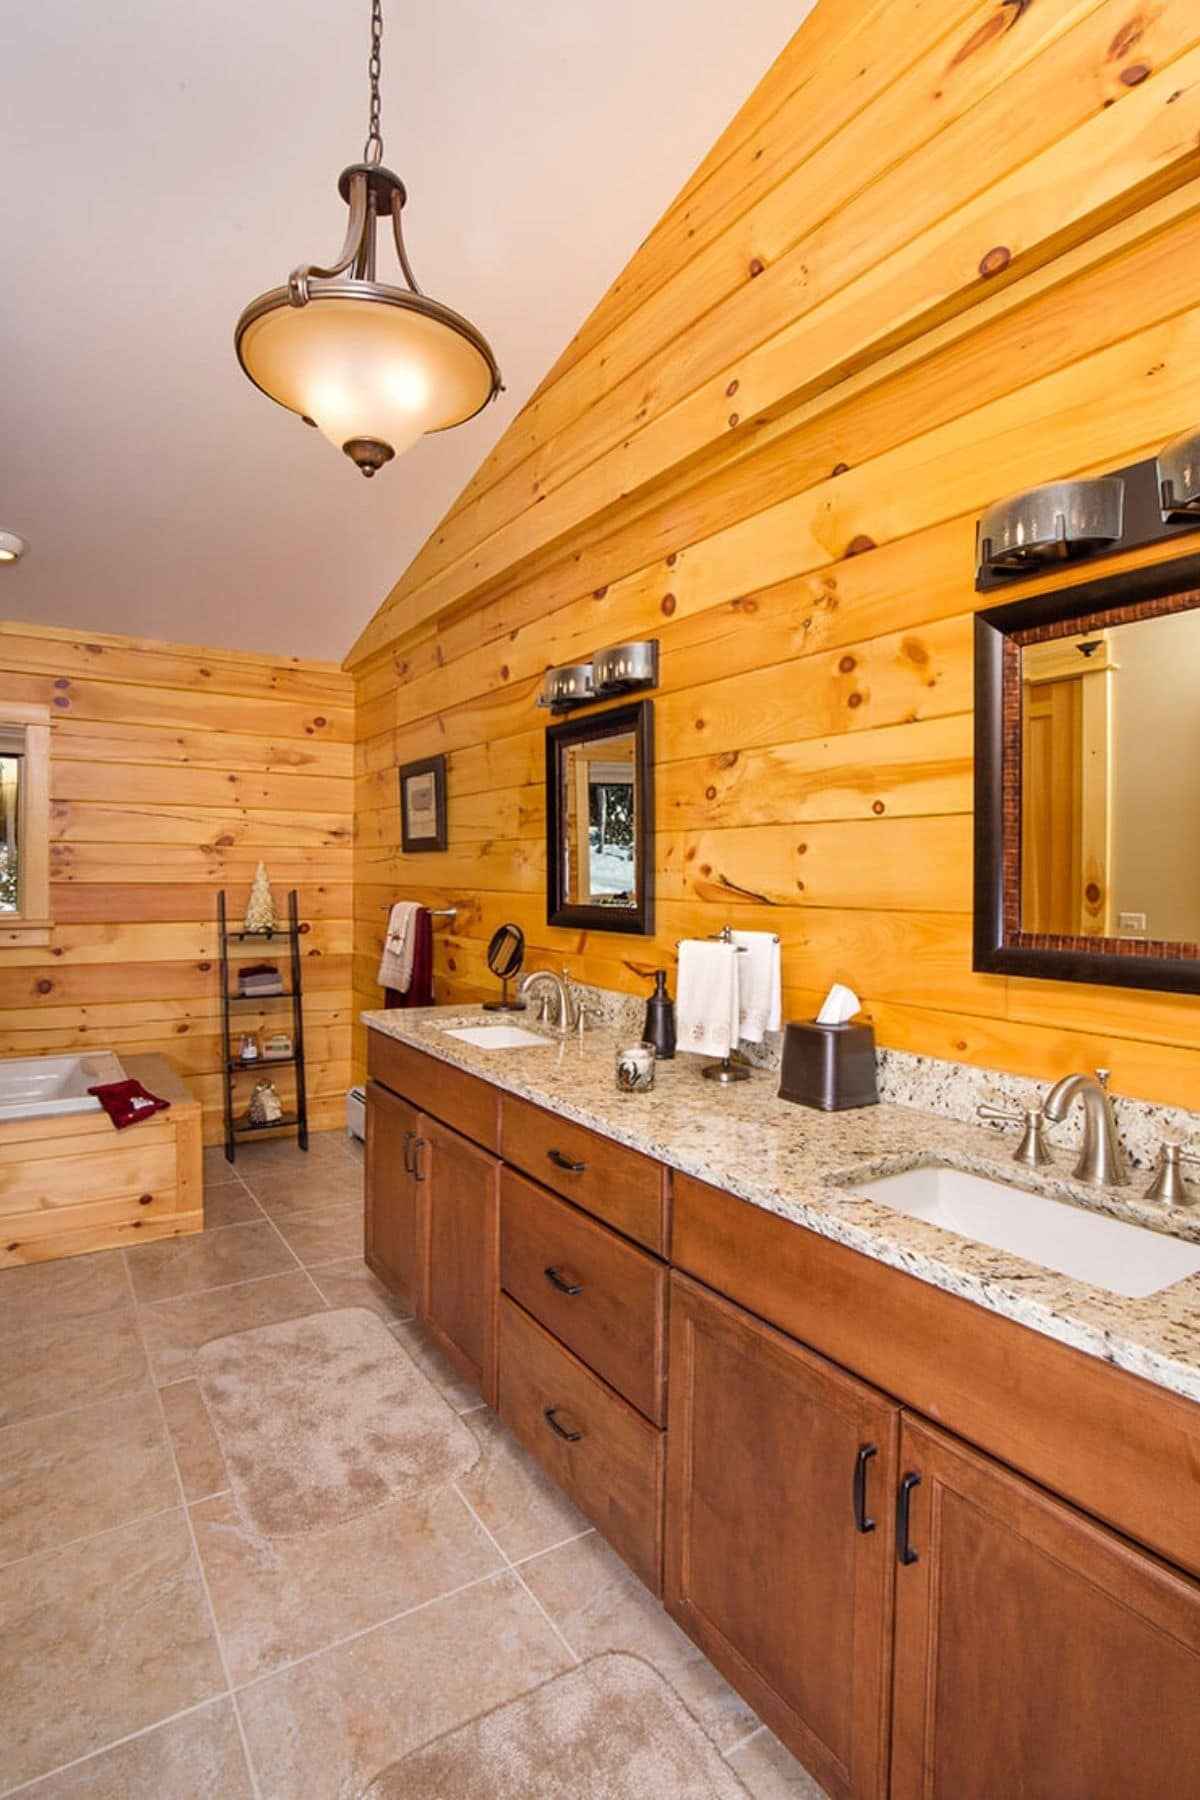 vanity with dark wood cabinets and two sinks against right wall of bathroom with wood surrounding bathtub at back end of room and log walls